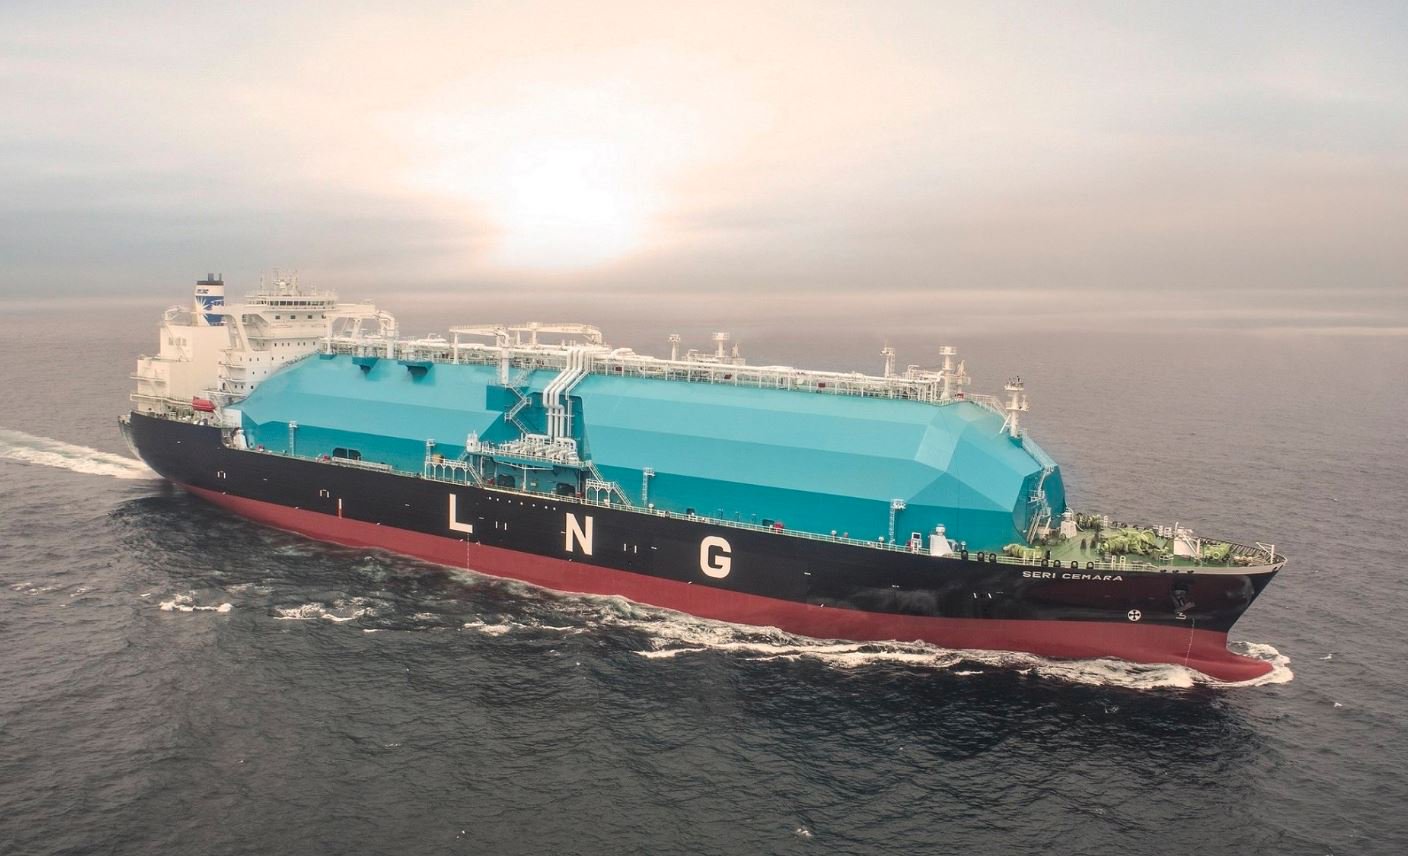 MISC nine-month revenue lifted by LNG business